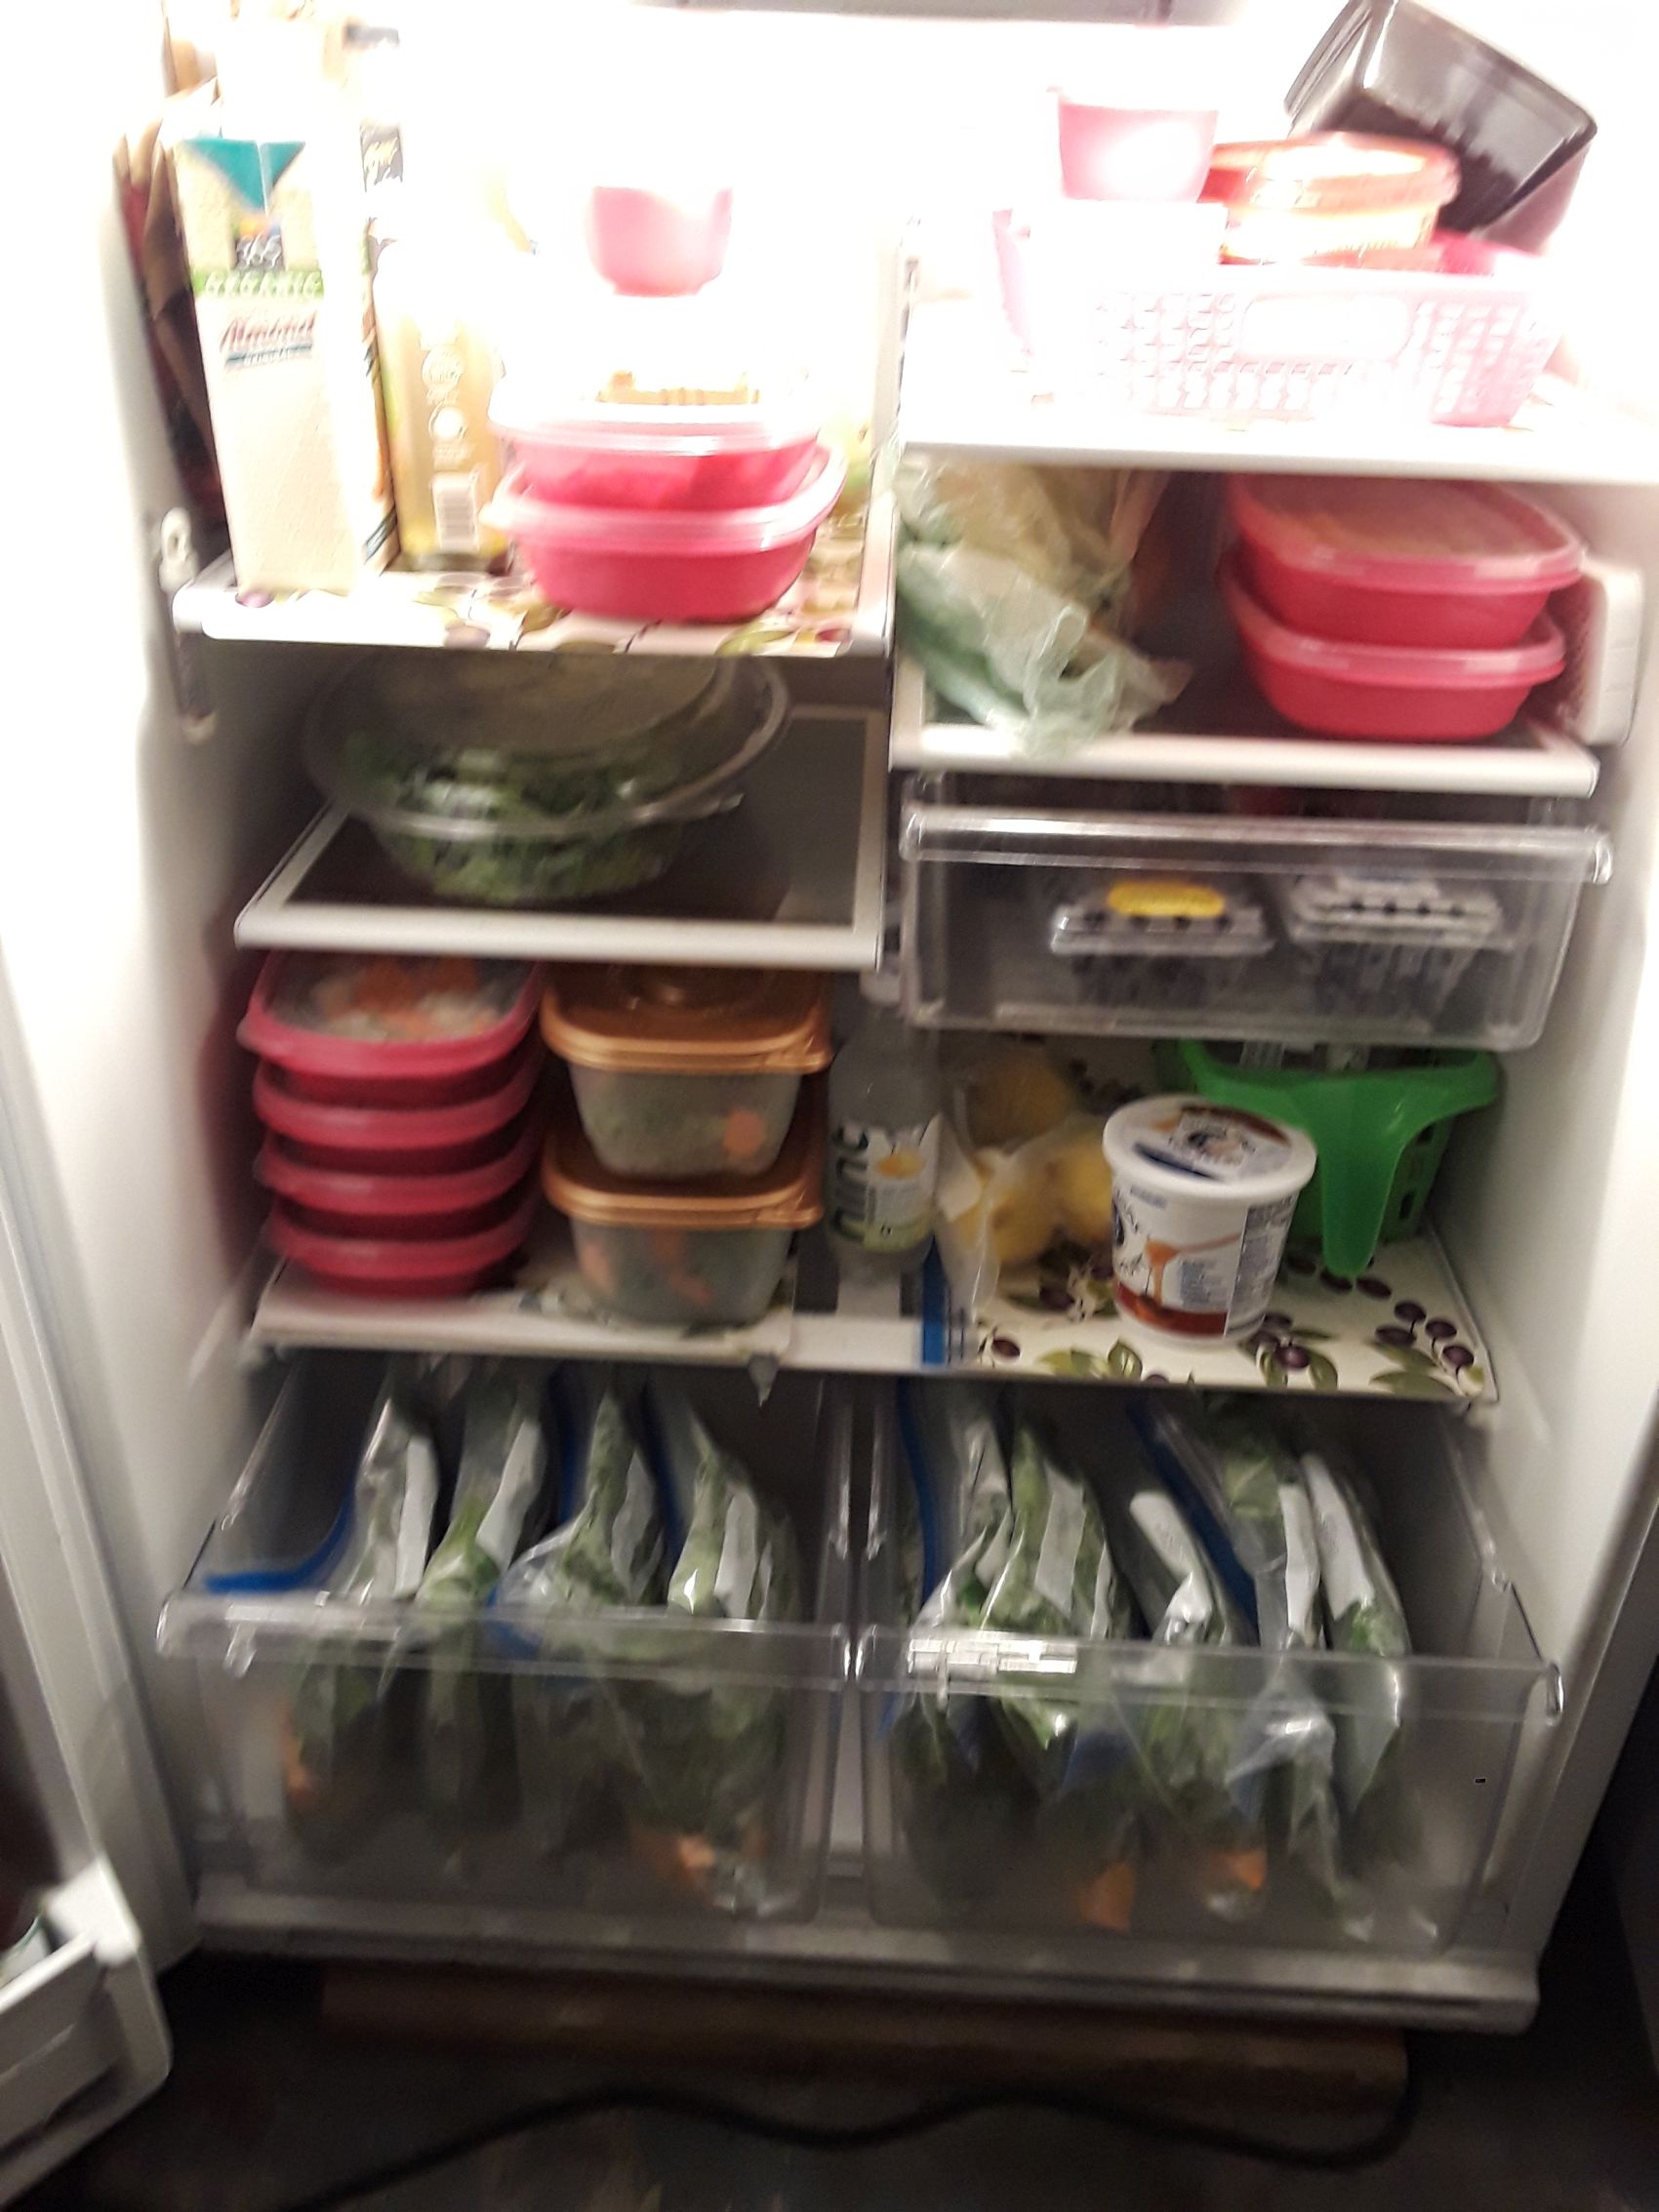 Full Fridge of Prepped Meals May 19 2019